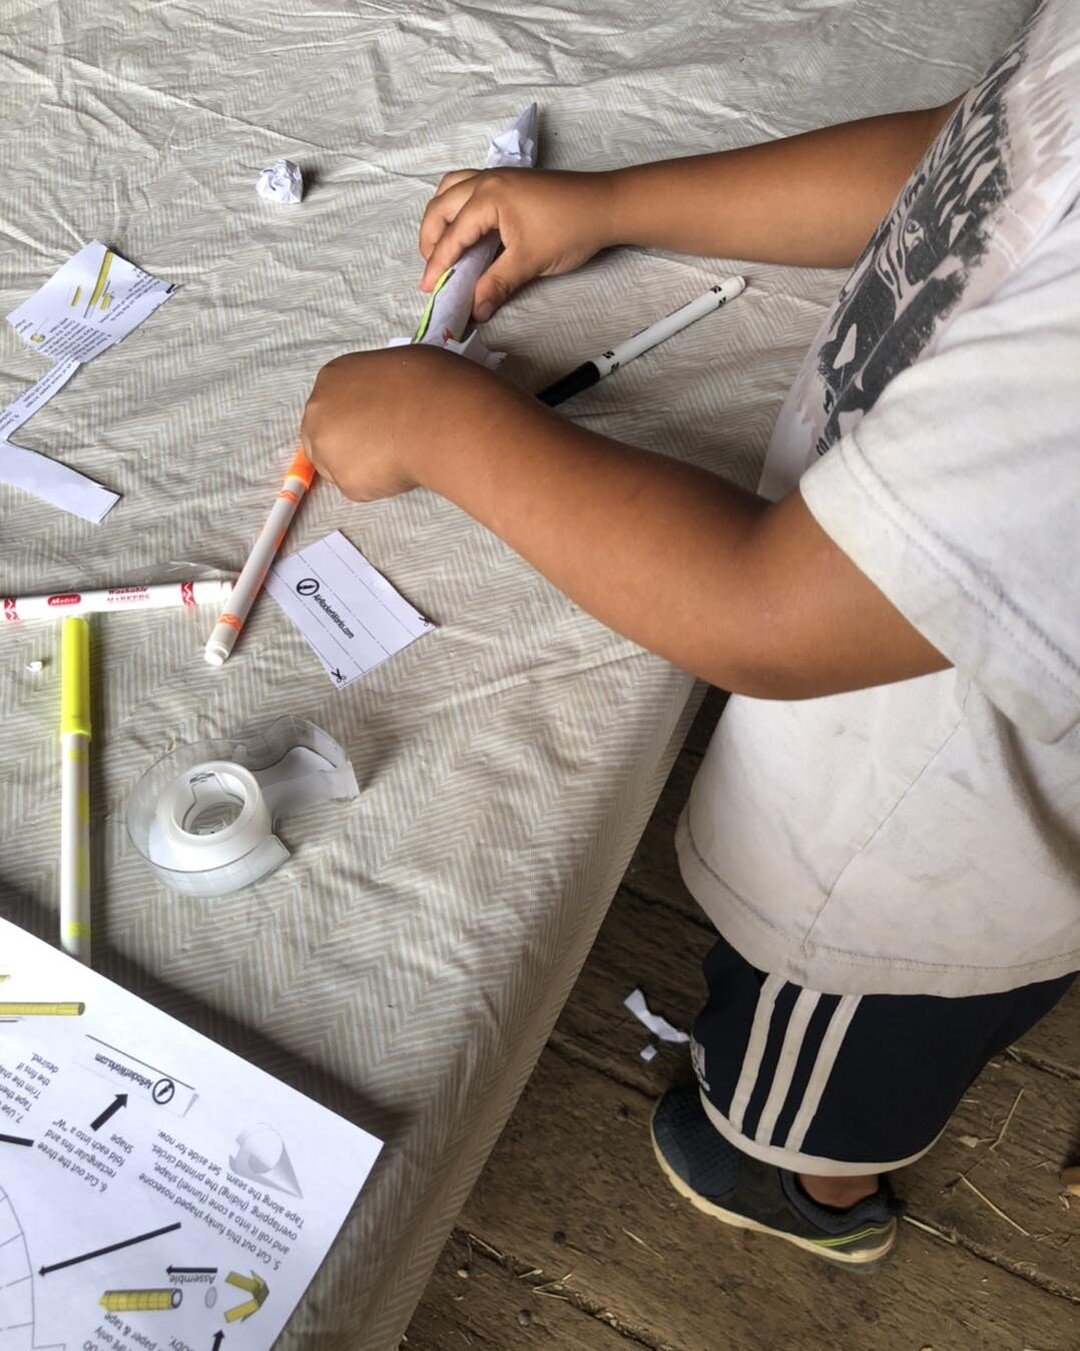 Day 3 of camp has wrapped, great work by our campers! 

If you&rsquo;re interested in checking out our workshops and the amazing Field To Fork Farm, click below to see our available programs coming up. 

https://www.renaissancekid.org/stem-programs/s